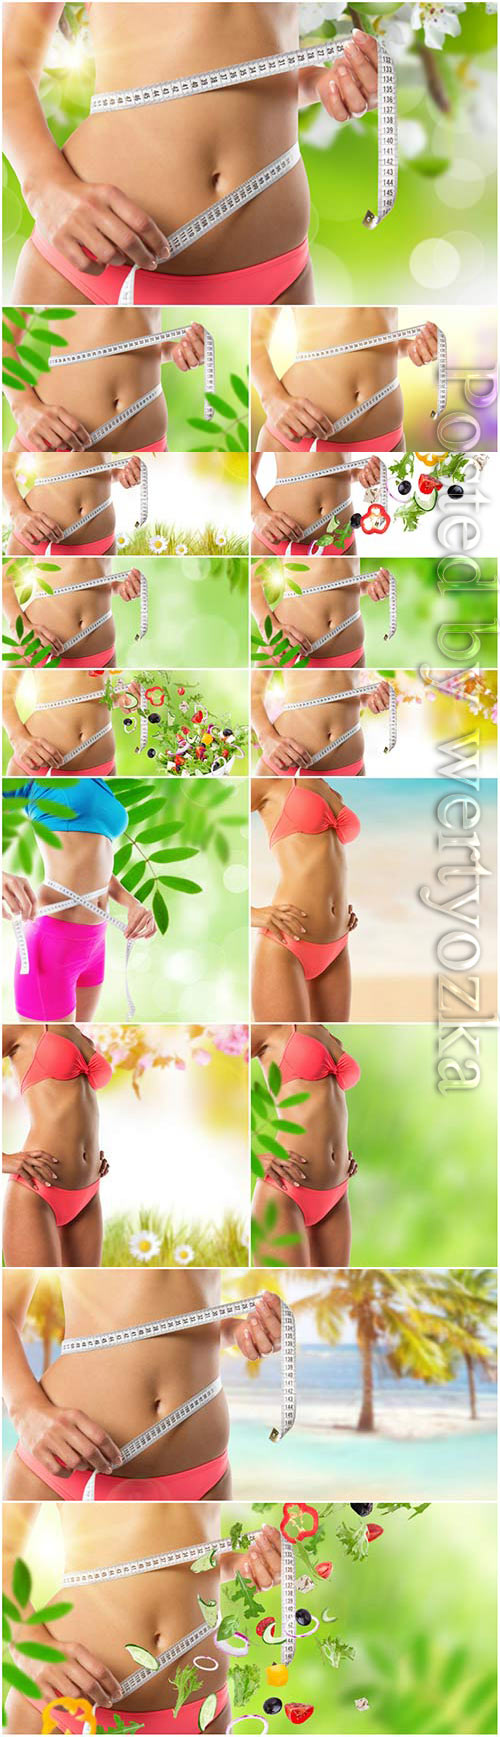 Beautiful female figure and healthy eating concept stock photo